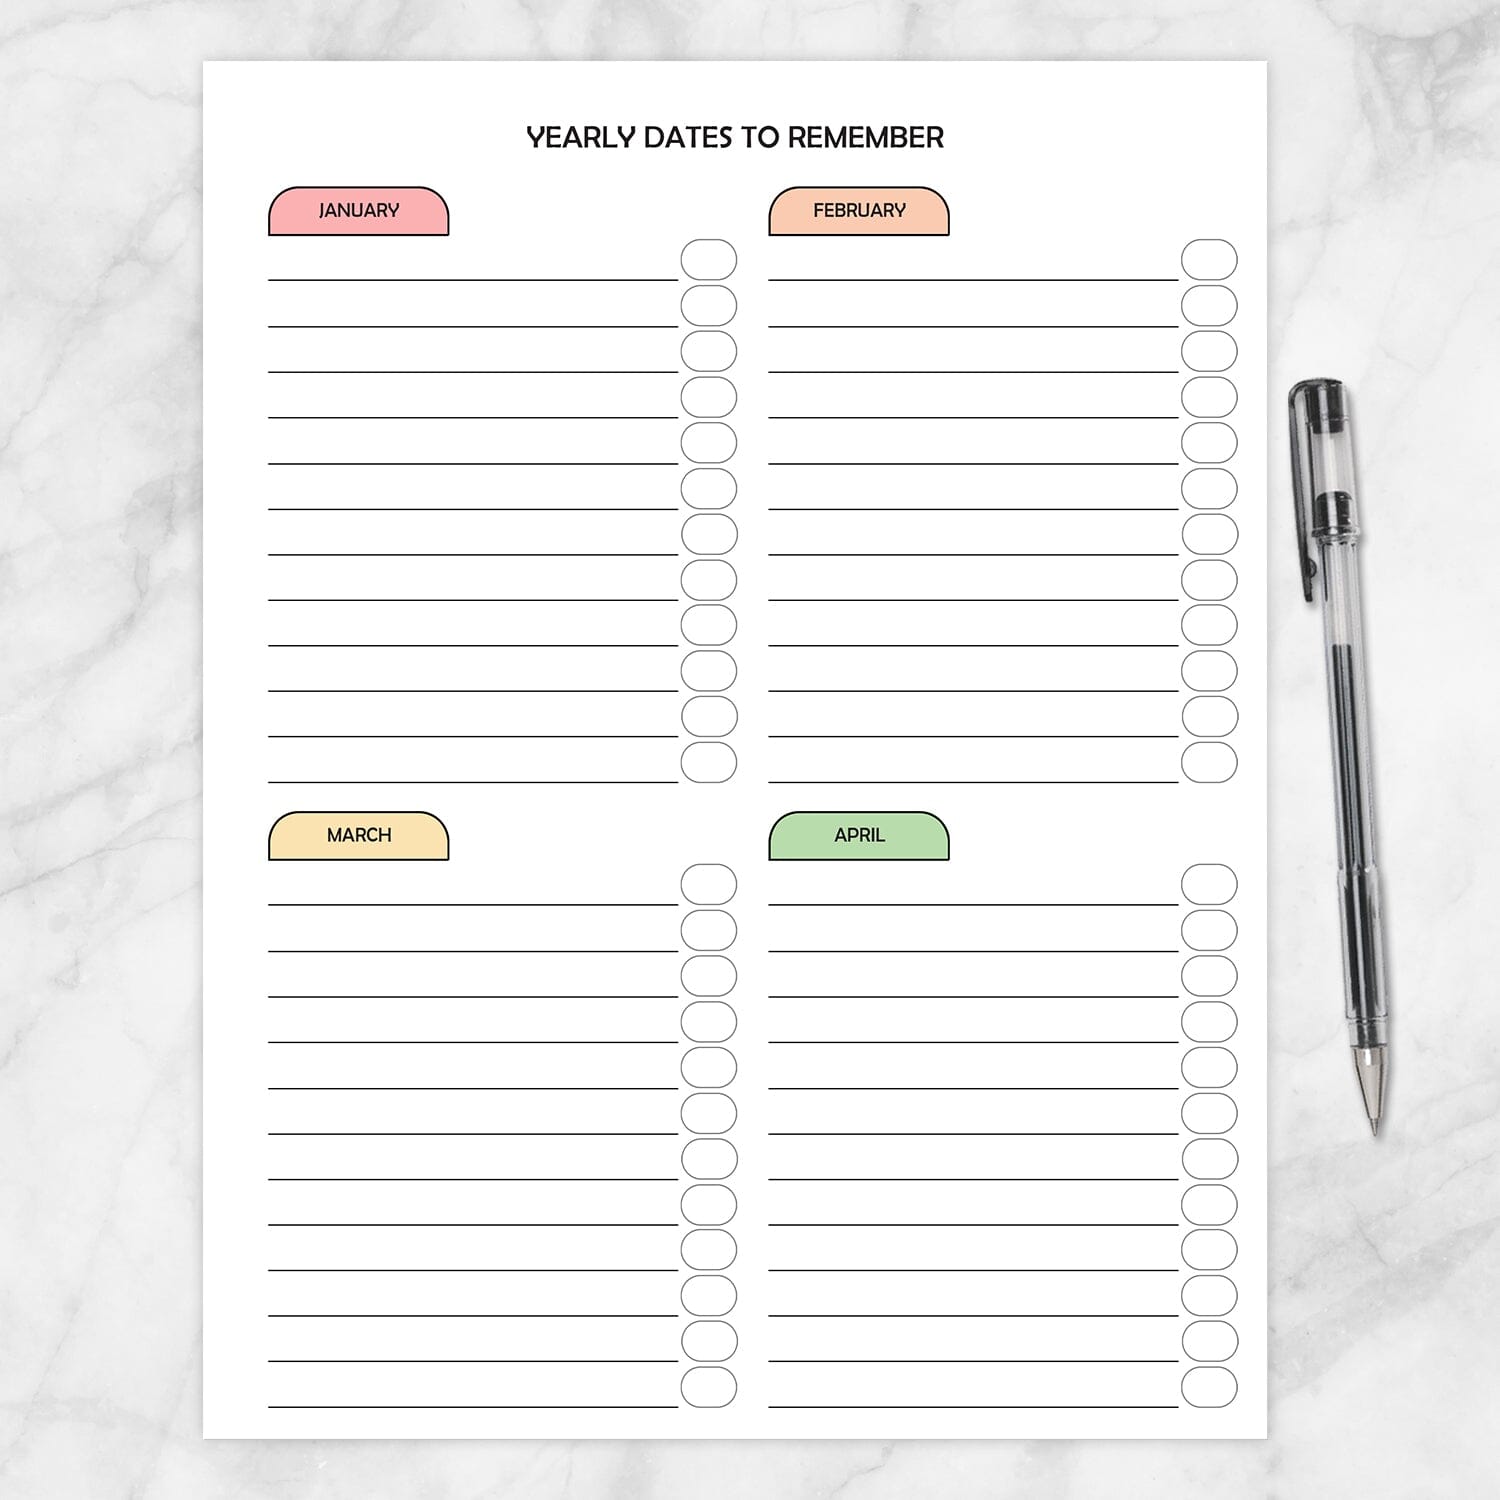 Printable Yearly Dates to Remember (page 1 of 3) at Printable Planning.